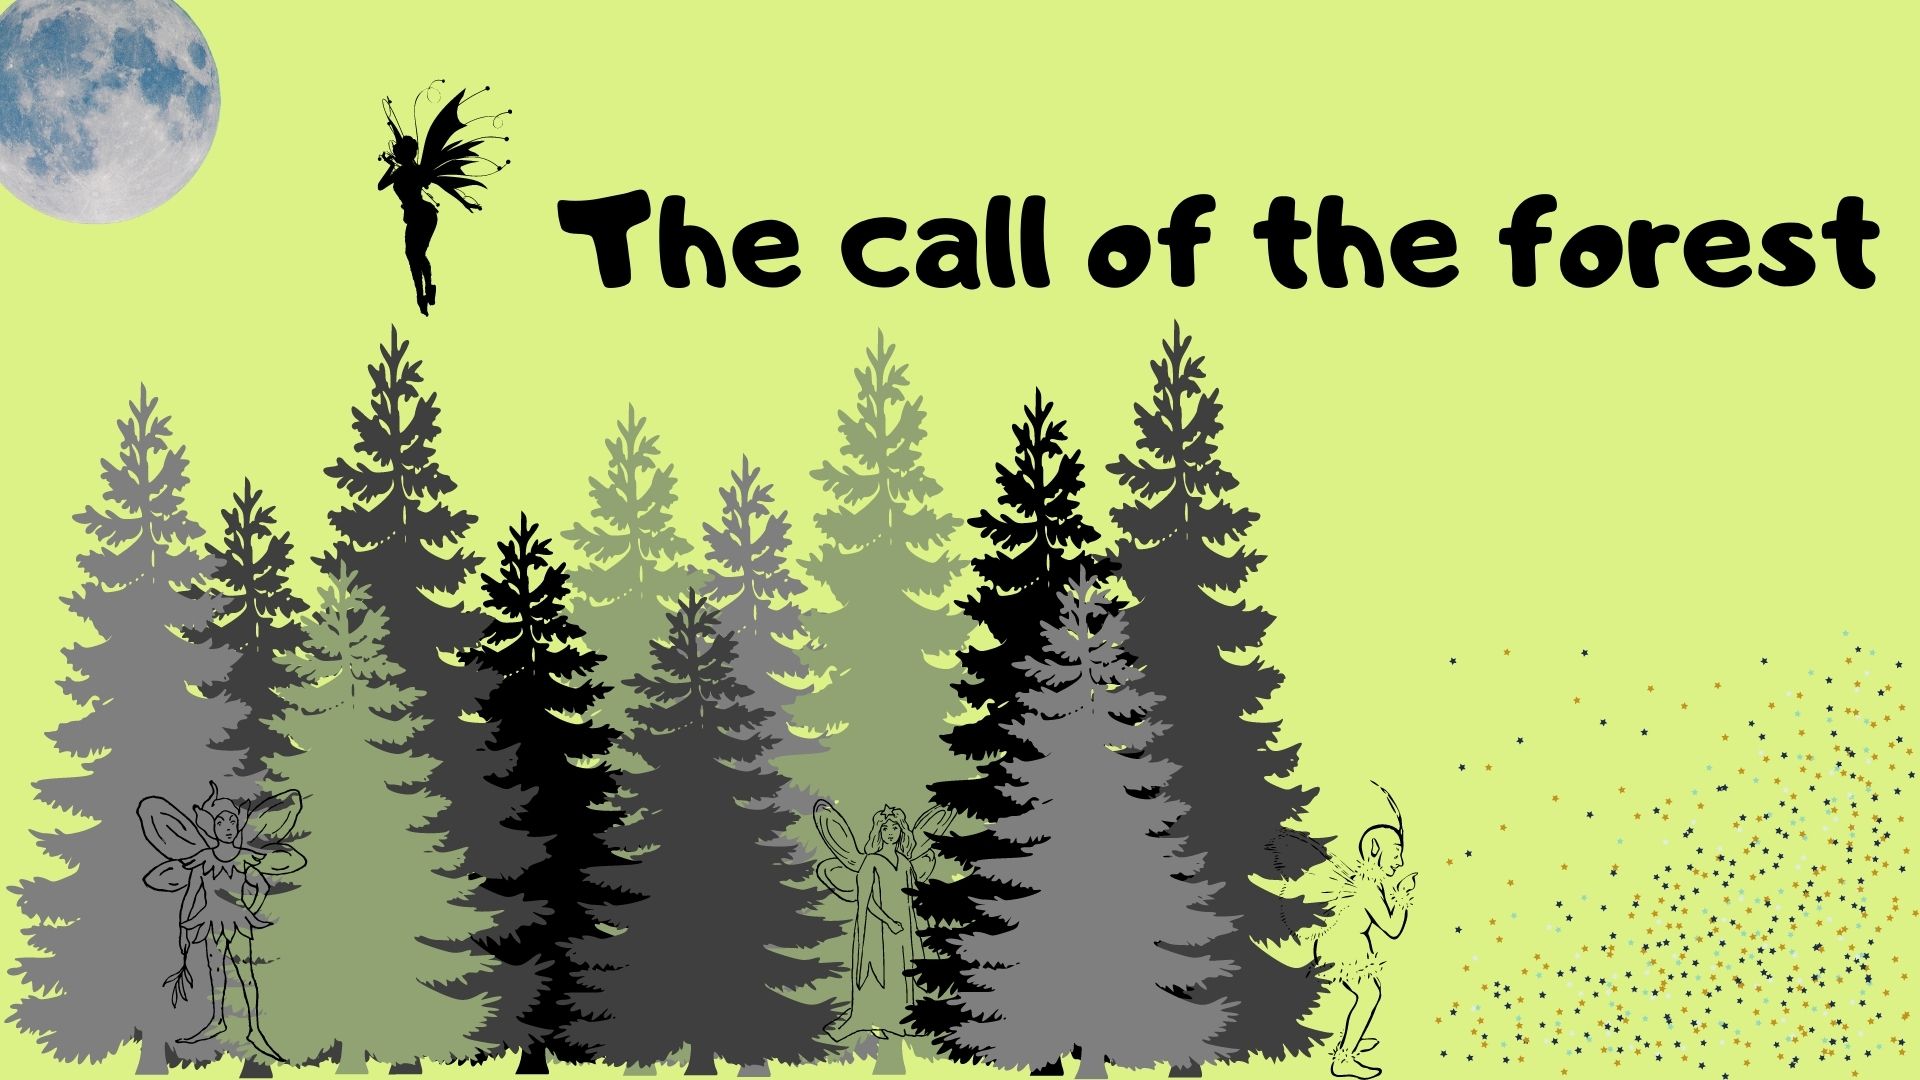 The call of the forest.jpg